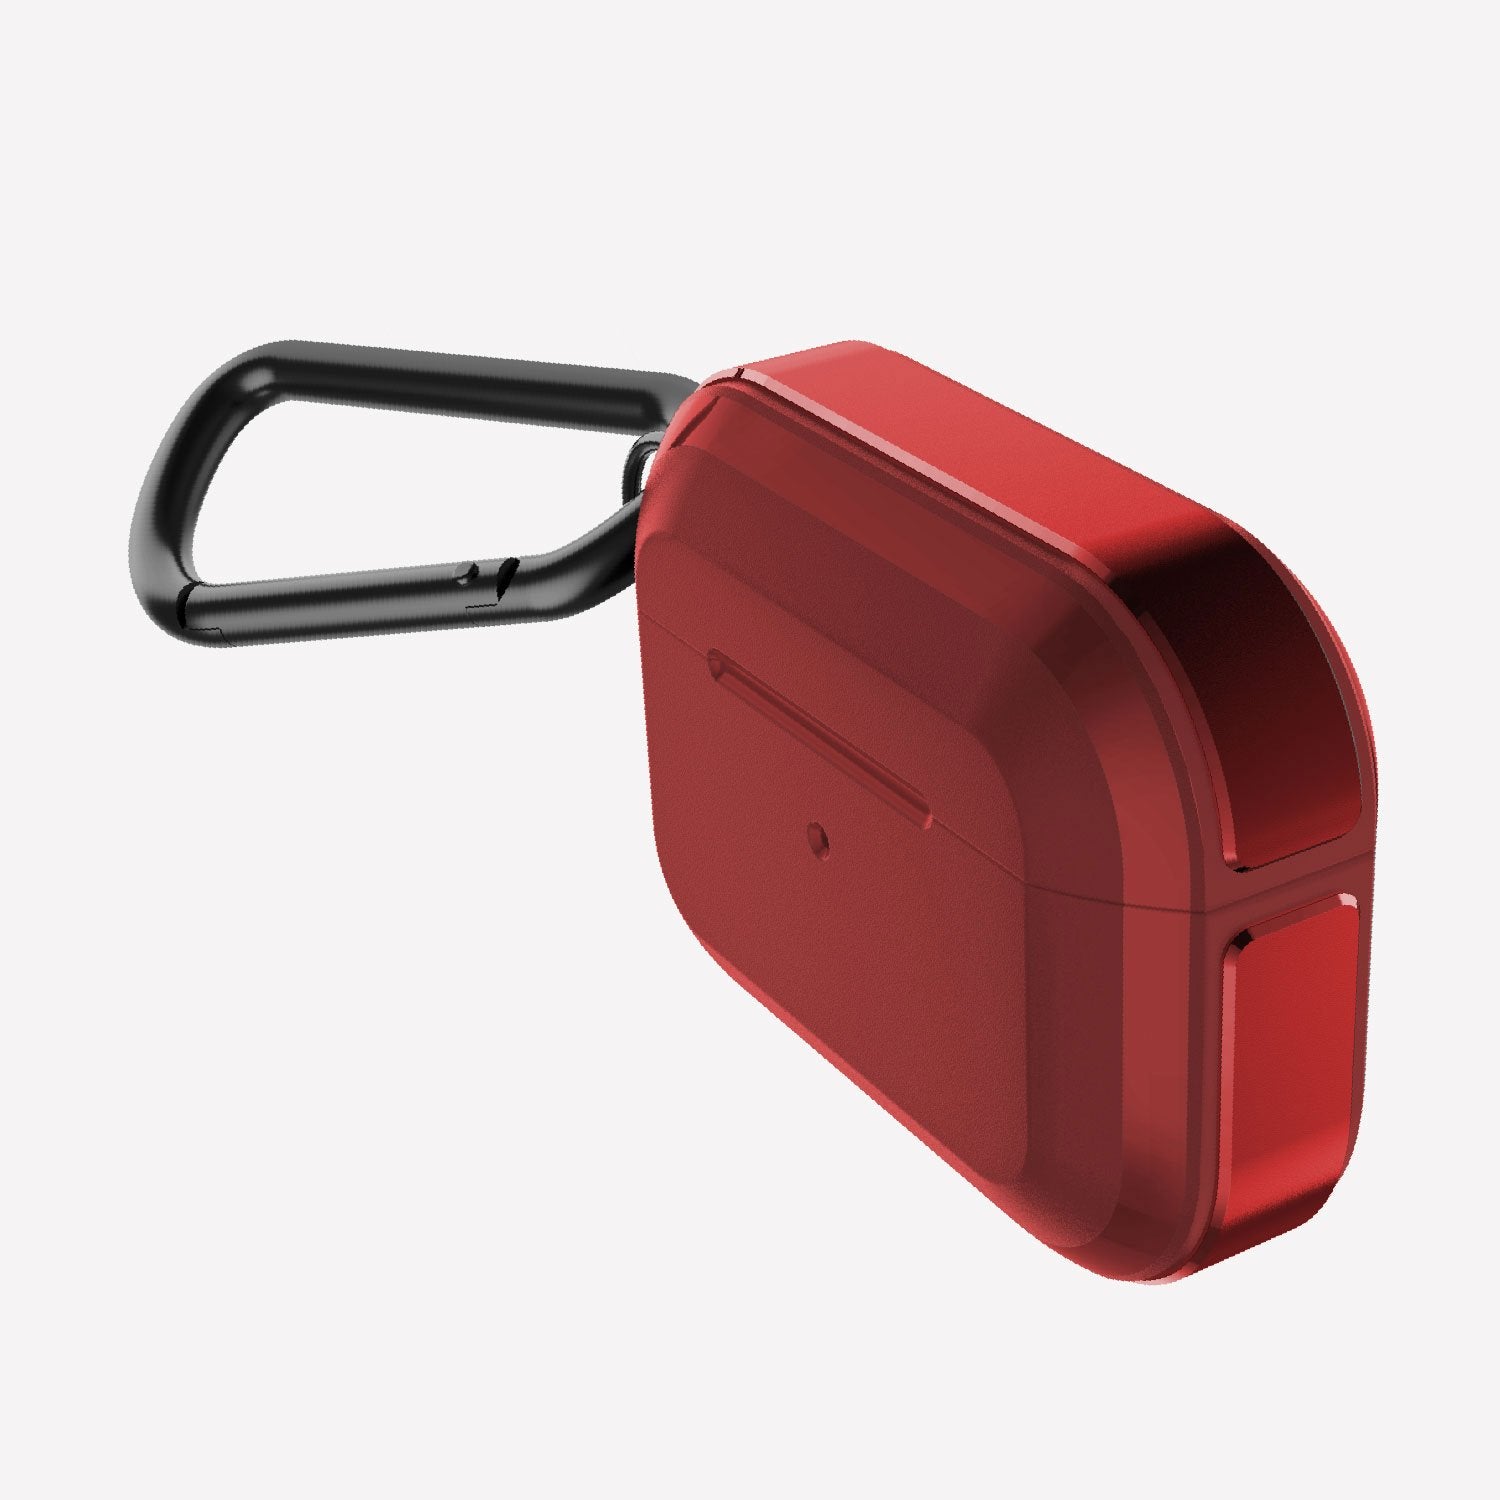 A red Raptic AirPods Pro Case - TREK with a black handle and a protective case.